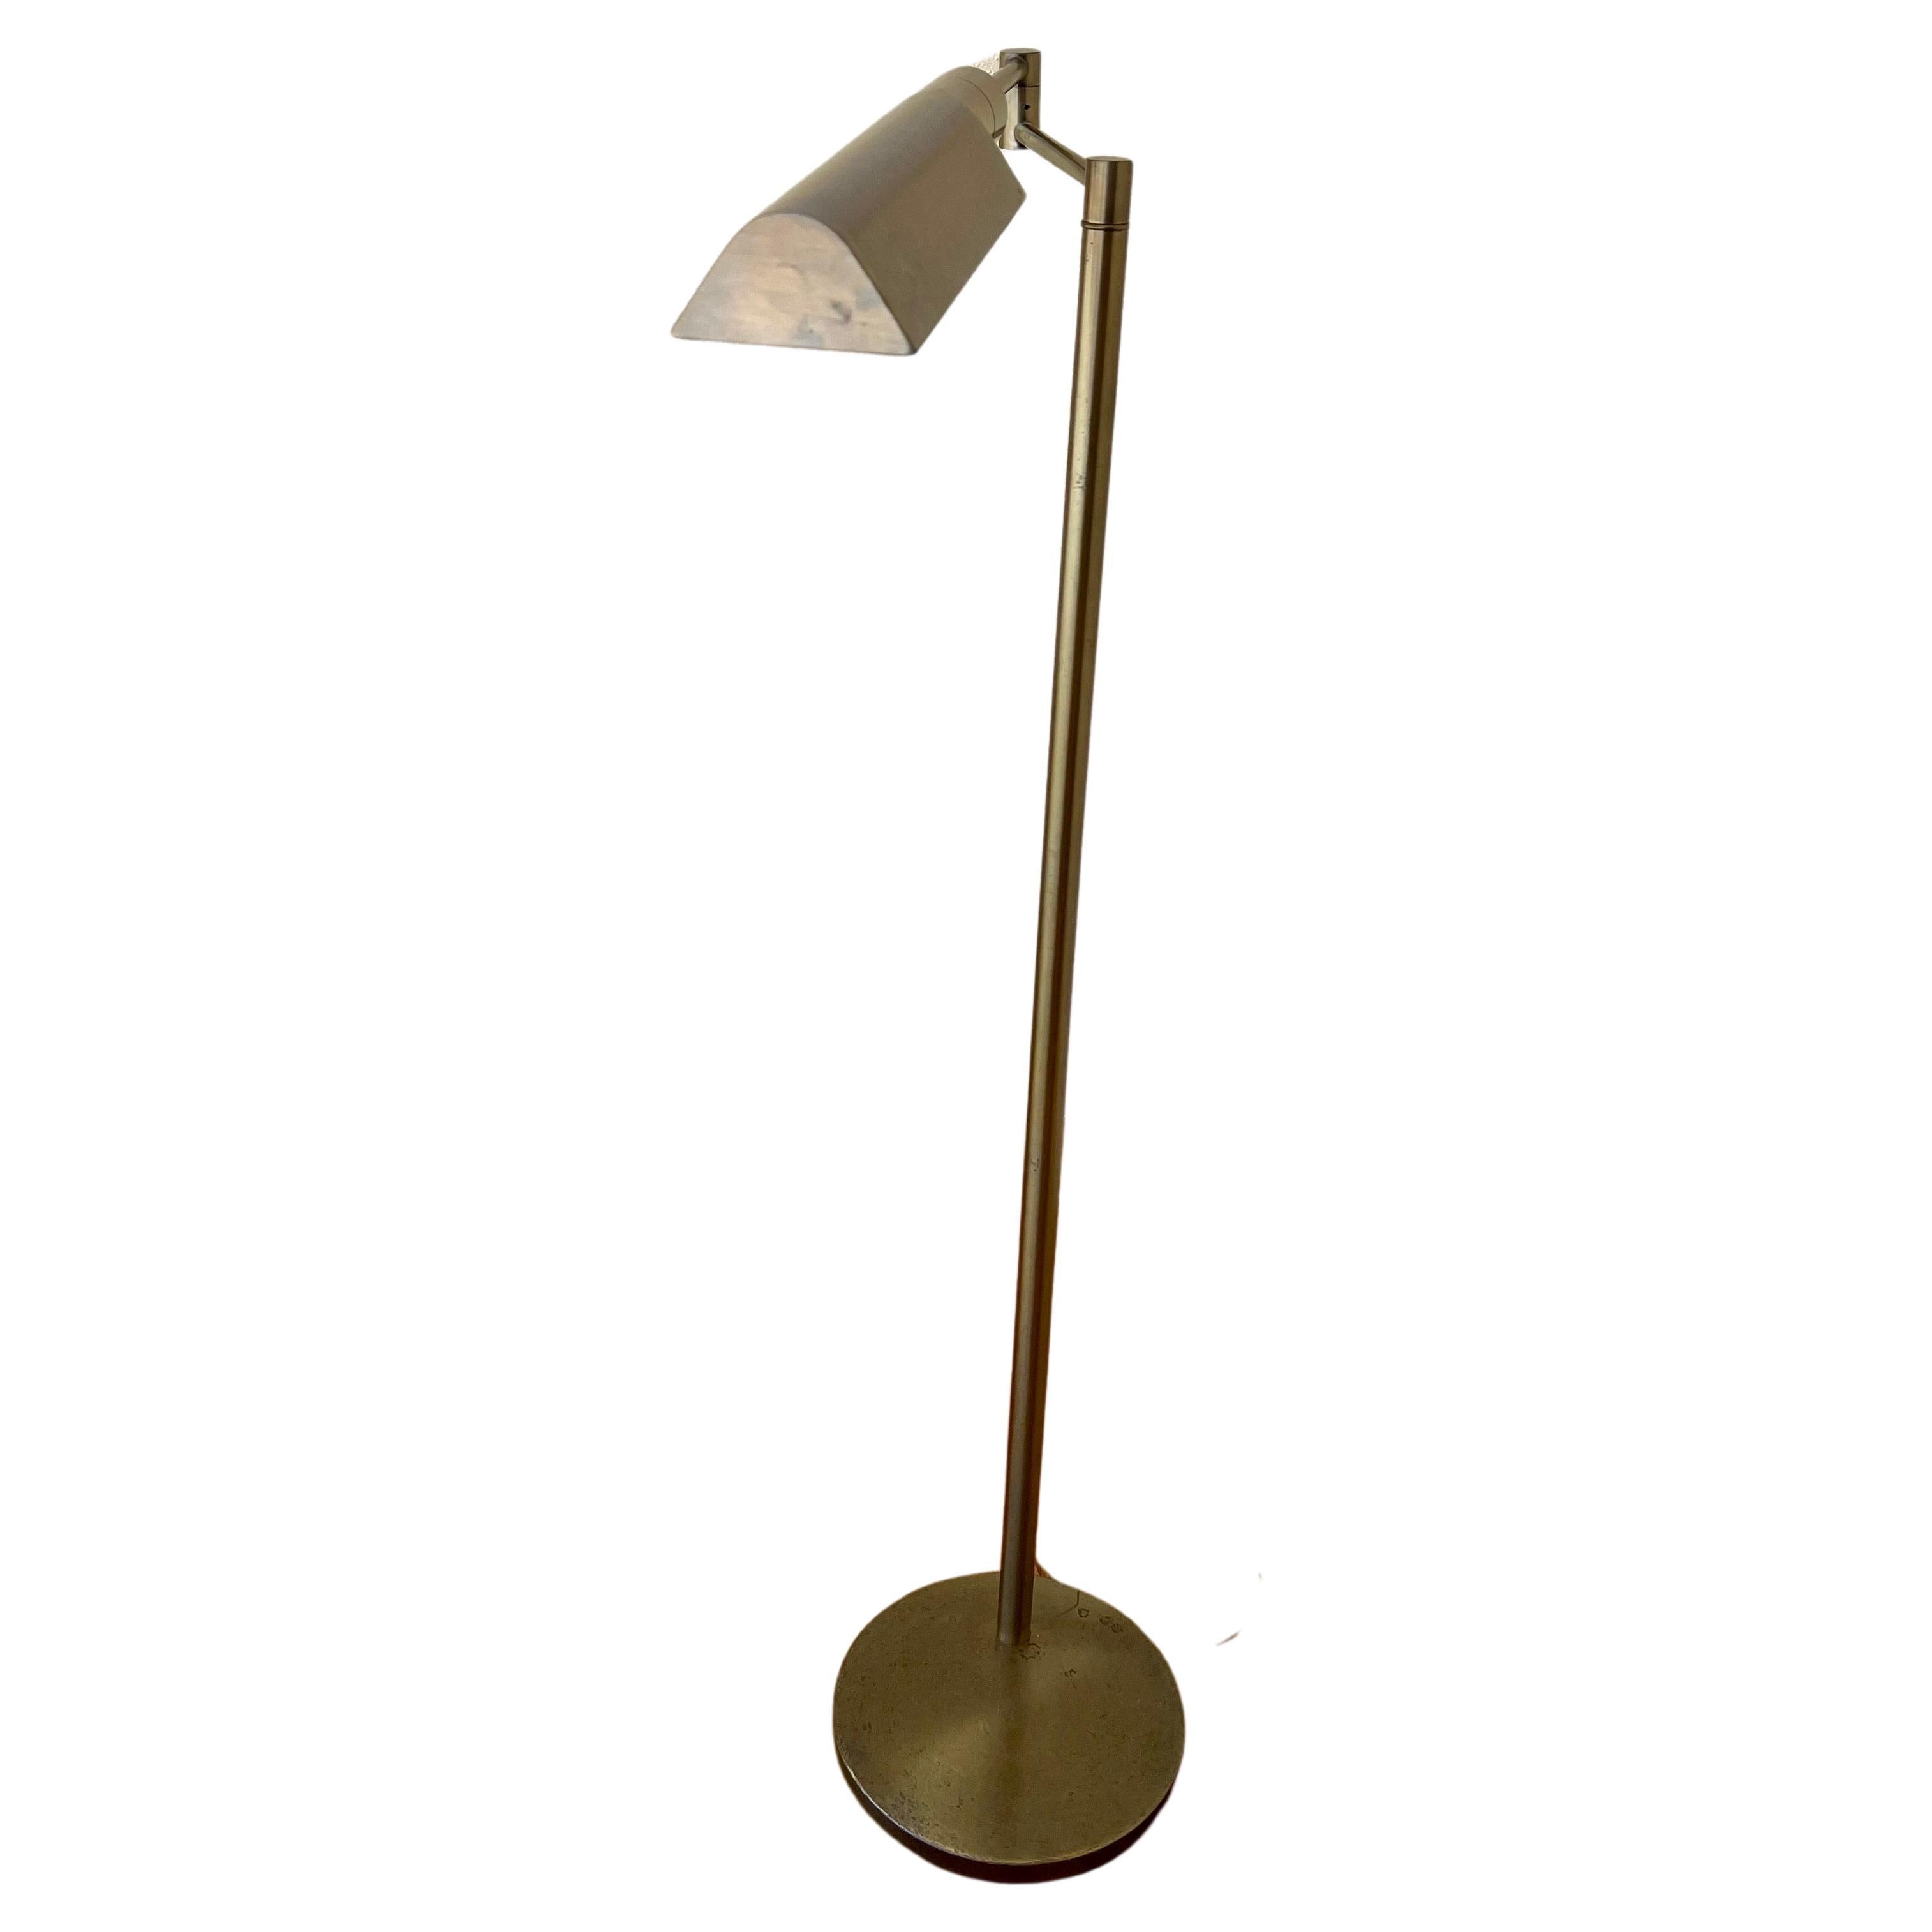 Elegant floor lamp in antique bronze finish by Casella Lighting, circa 1980s. The lamp is multi-directional and rotates from side to side and is in good working condition with a regular lightbulb and dimmer switch. The base is solid and heavy and